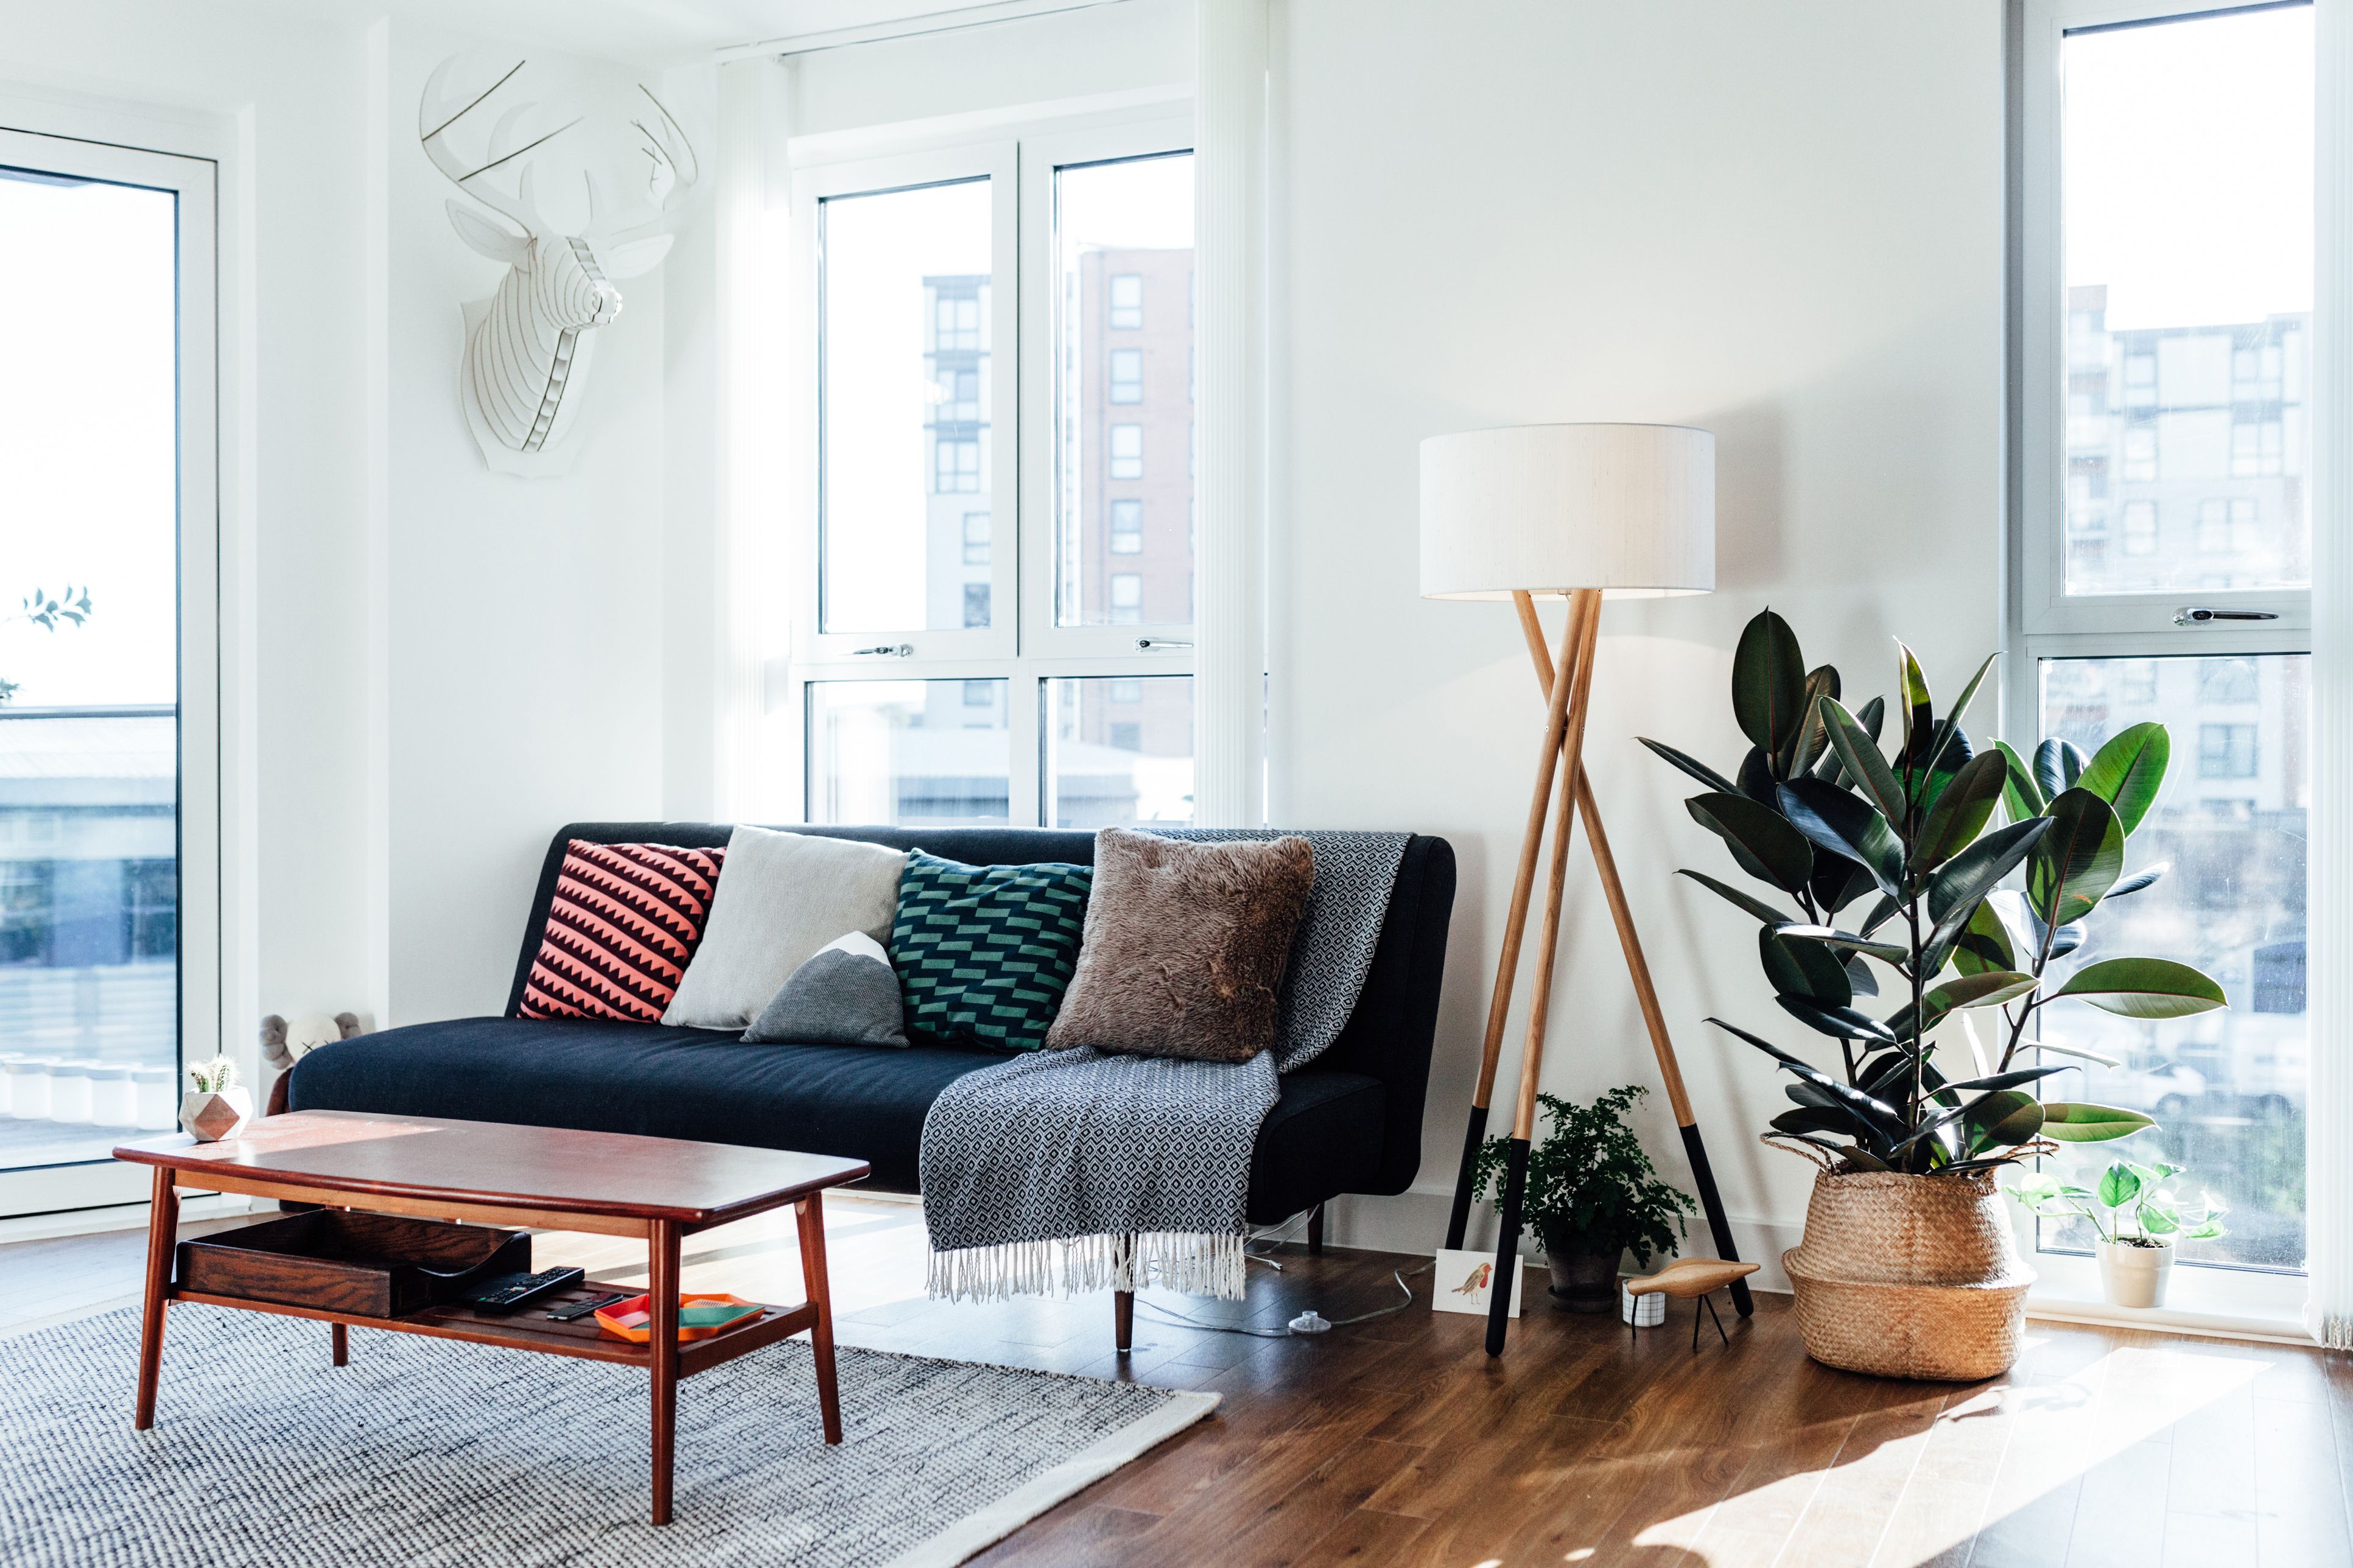 Tired of Paying Retail? Find Cheap Furniture Online